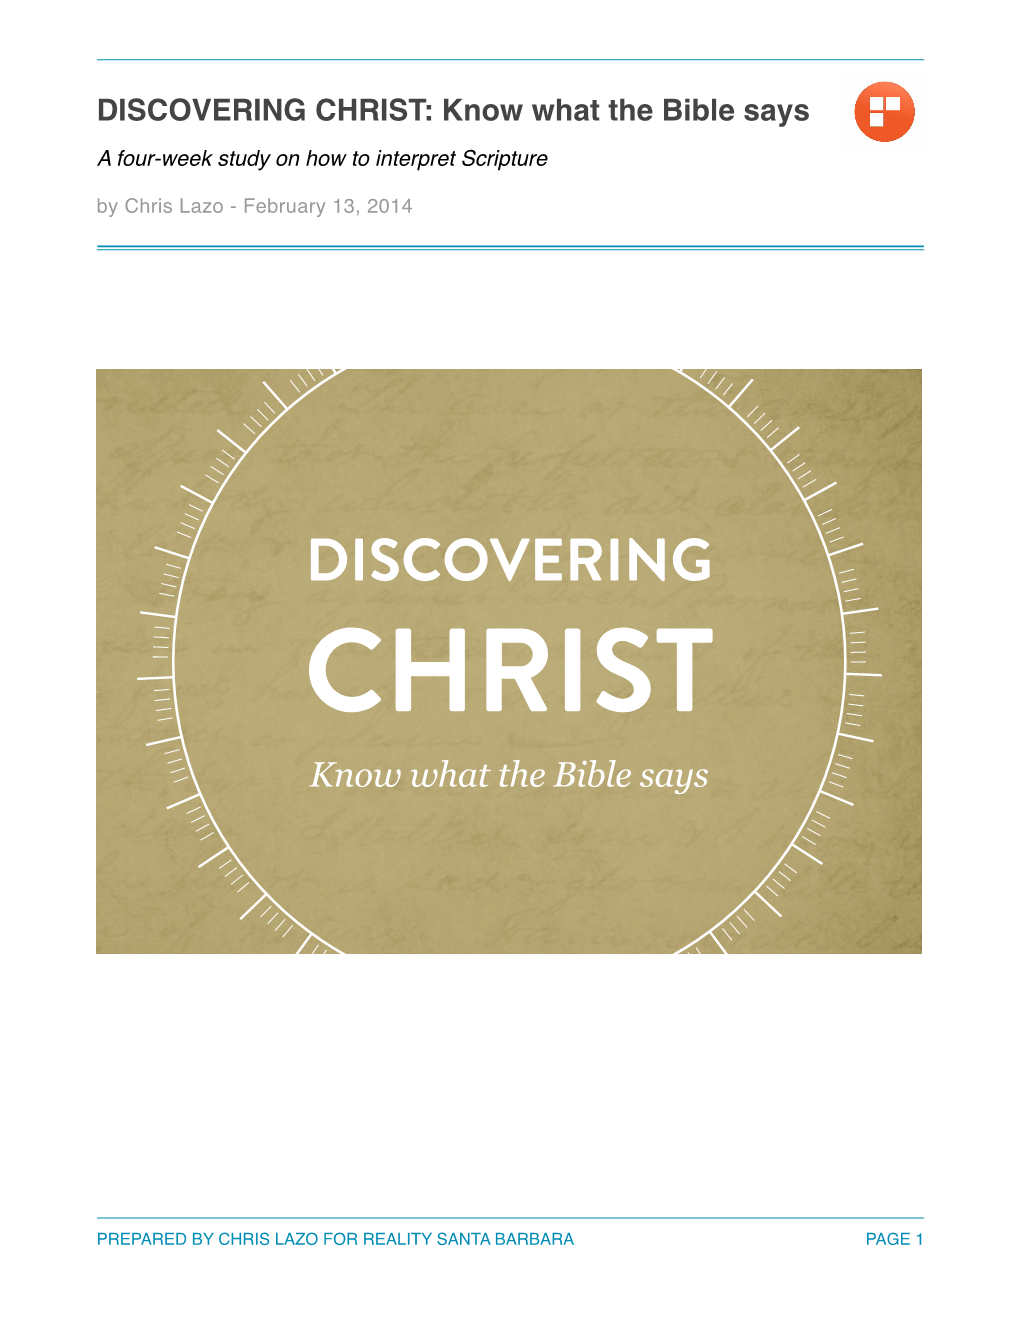 DISCOVERING CHRIST: Know What the Bible Says! �A Four-Week Study on How to Interpret Scripture! by Chris Lazo - February 13, 2014